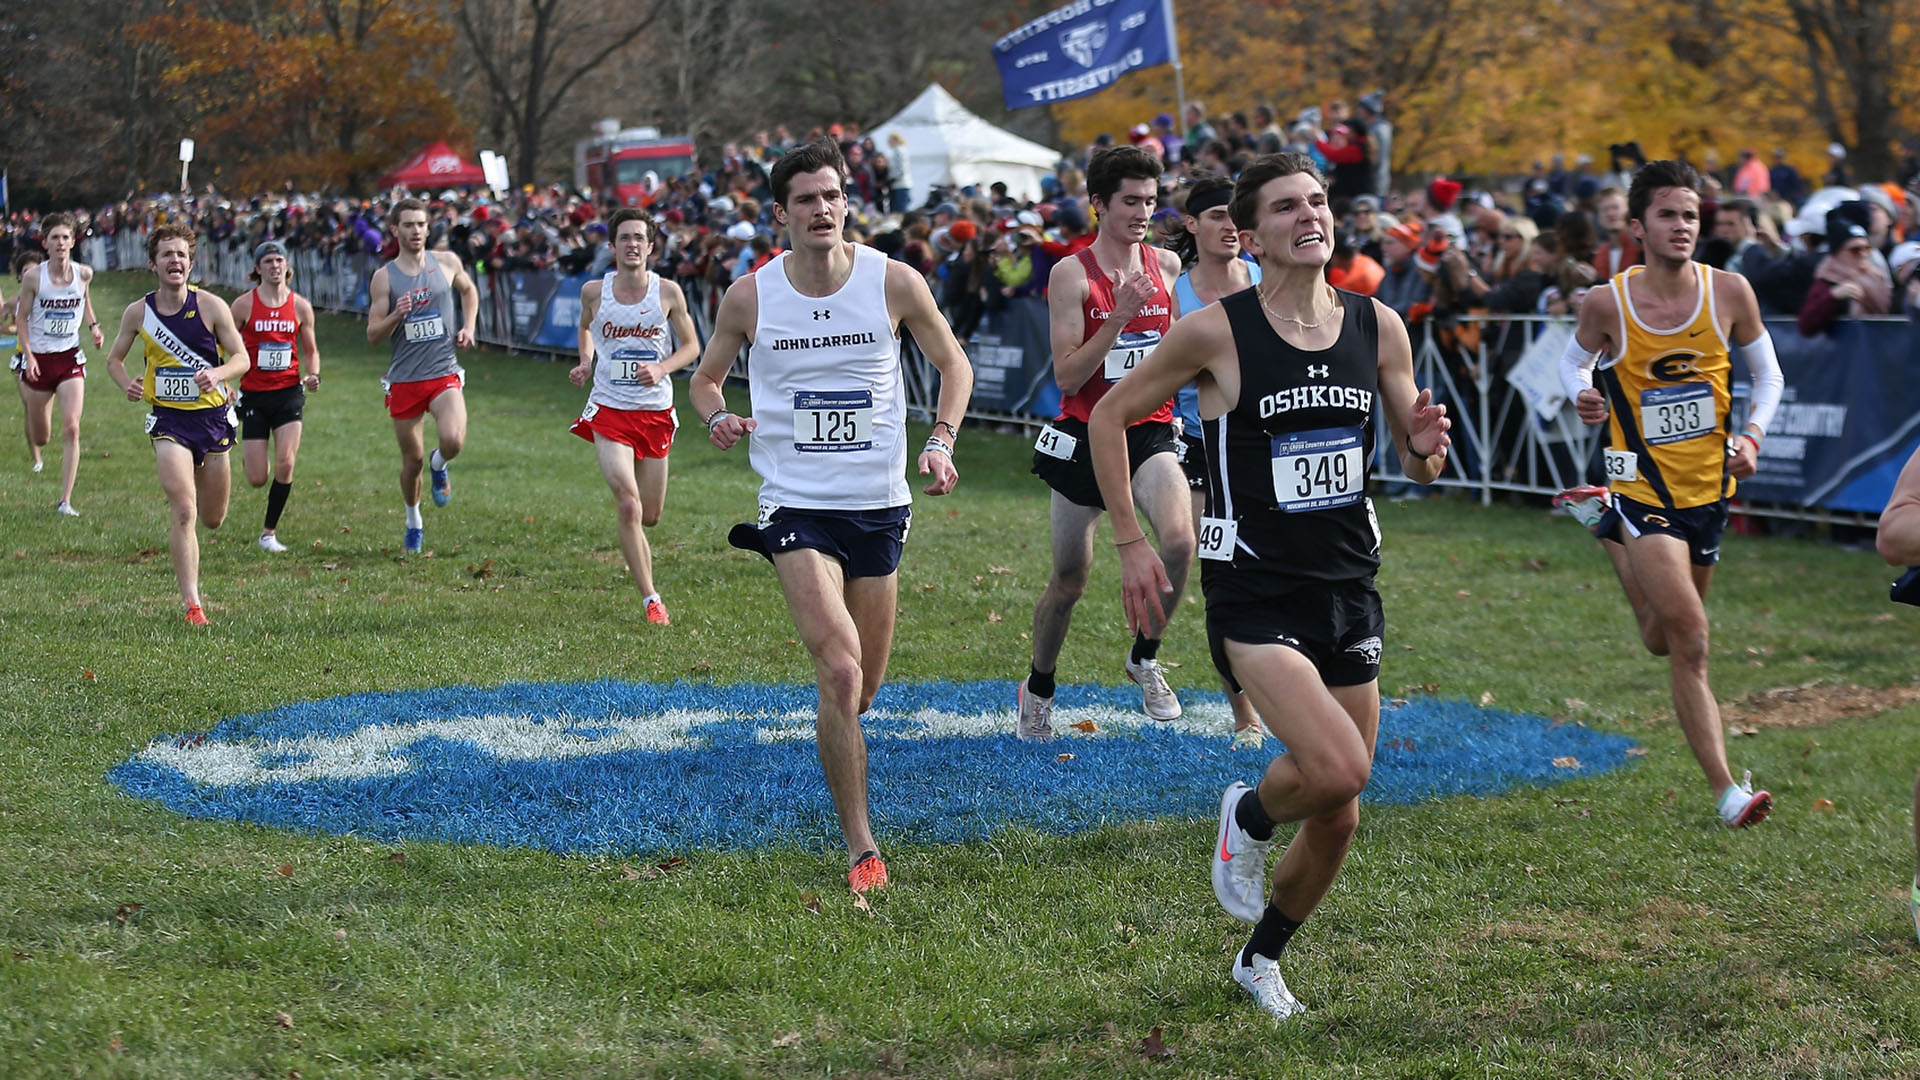 Mitchell Bradford paced the Titans with his 79th-place finish at the NCAA Division III Championship.